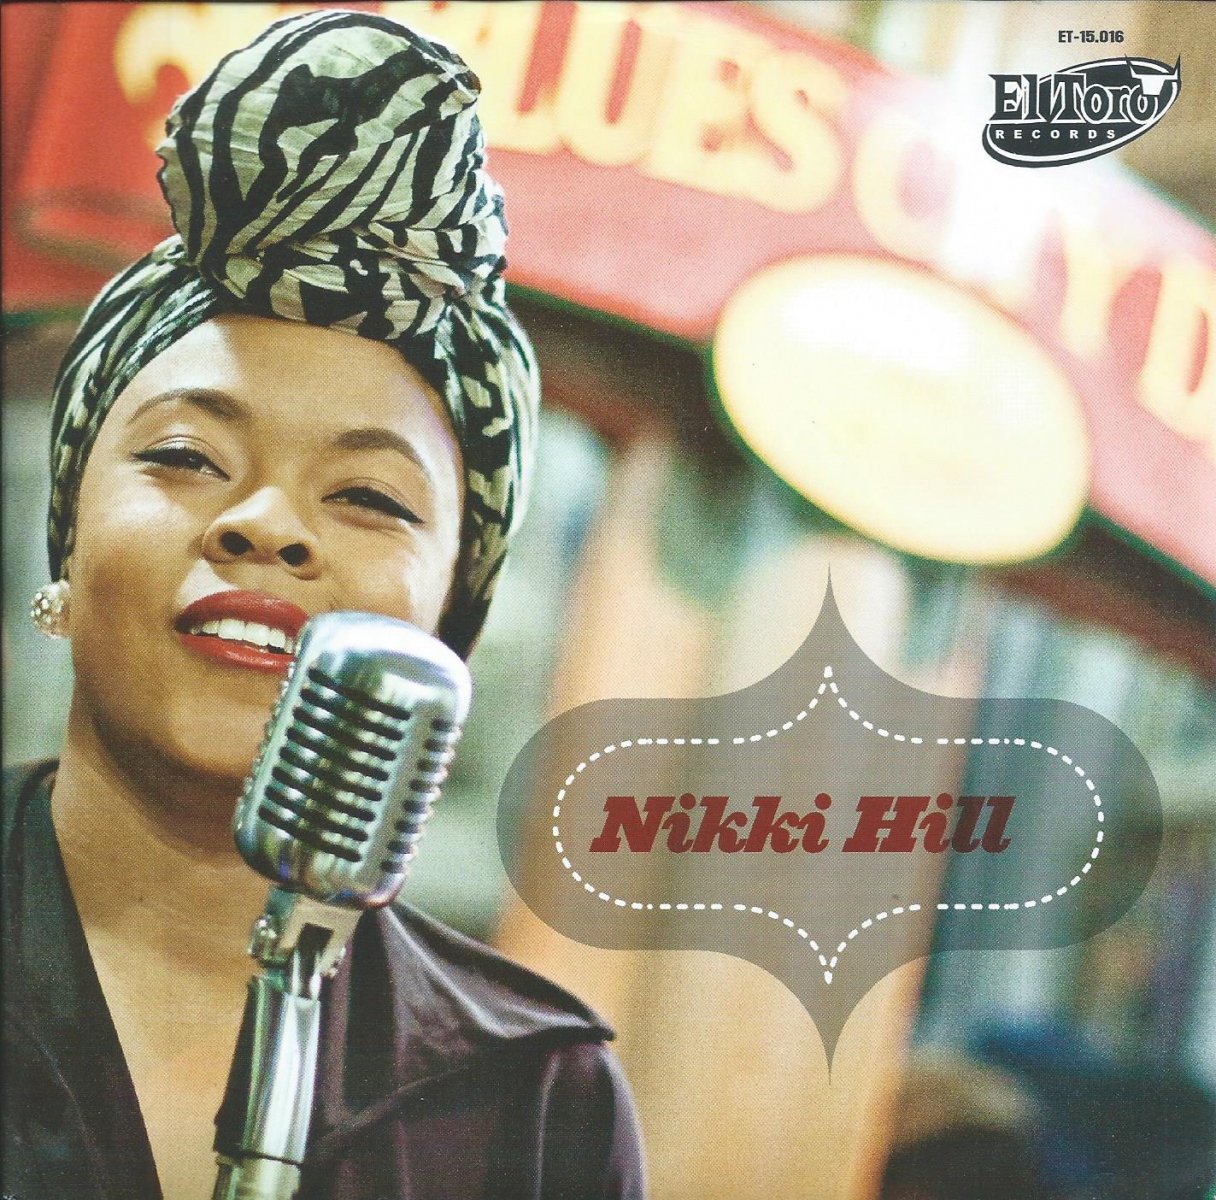 NIKKI HILL / I'VE GOT A MAN / STRAPPED TO THE BEAT (7